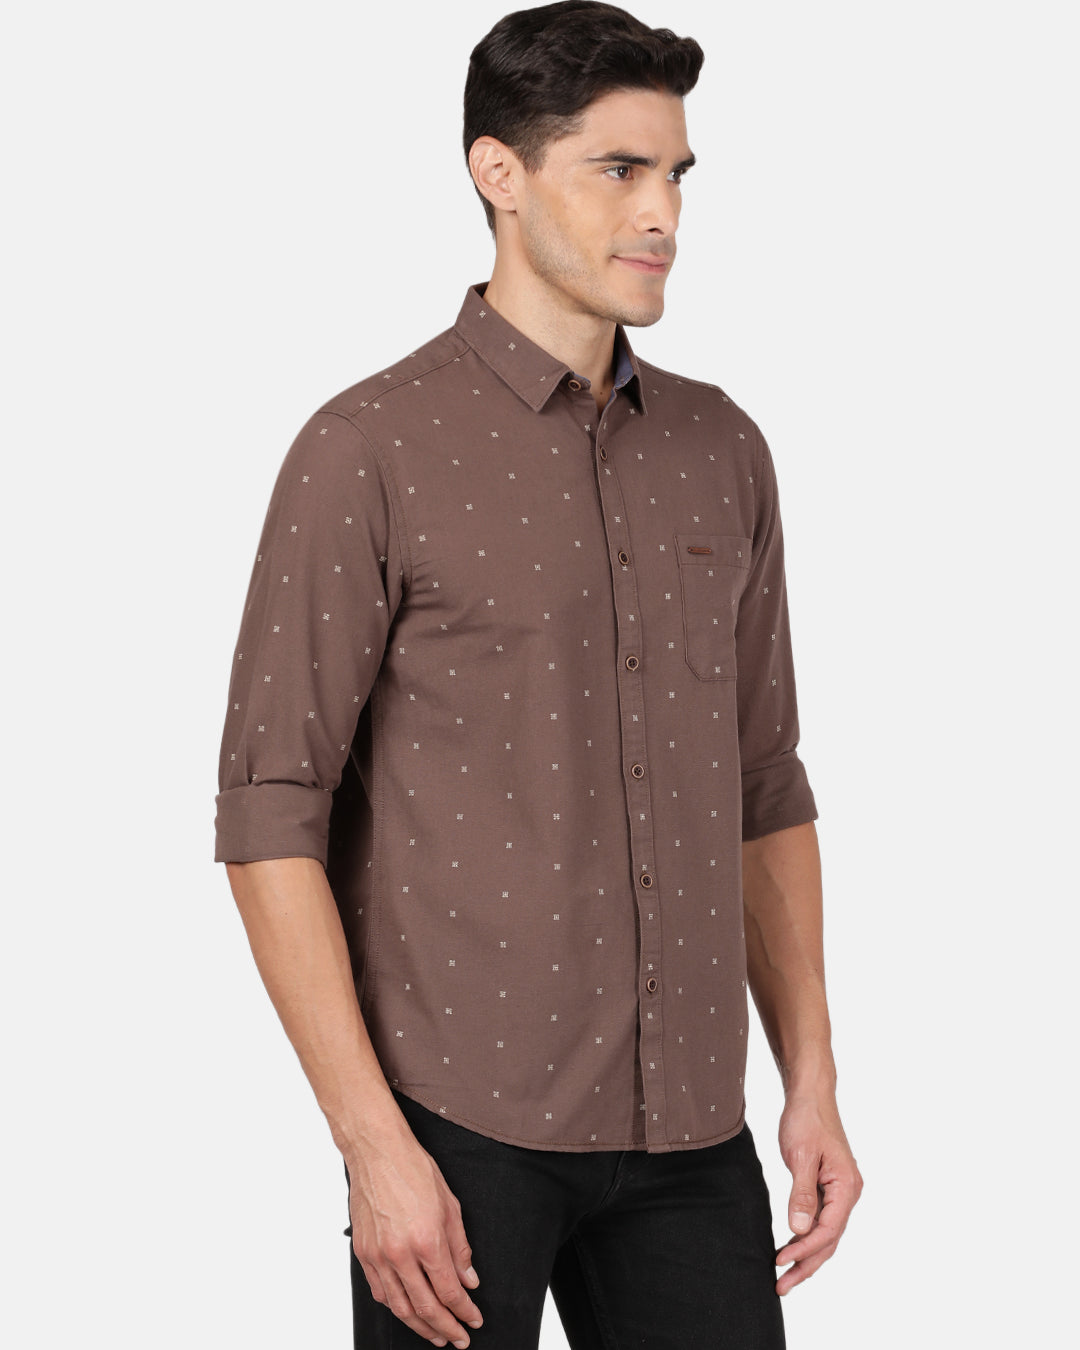 Crocodile Casual Full Sleeve Comfort Fit Printed Brown with Collar Shirt for Men